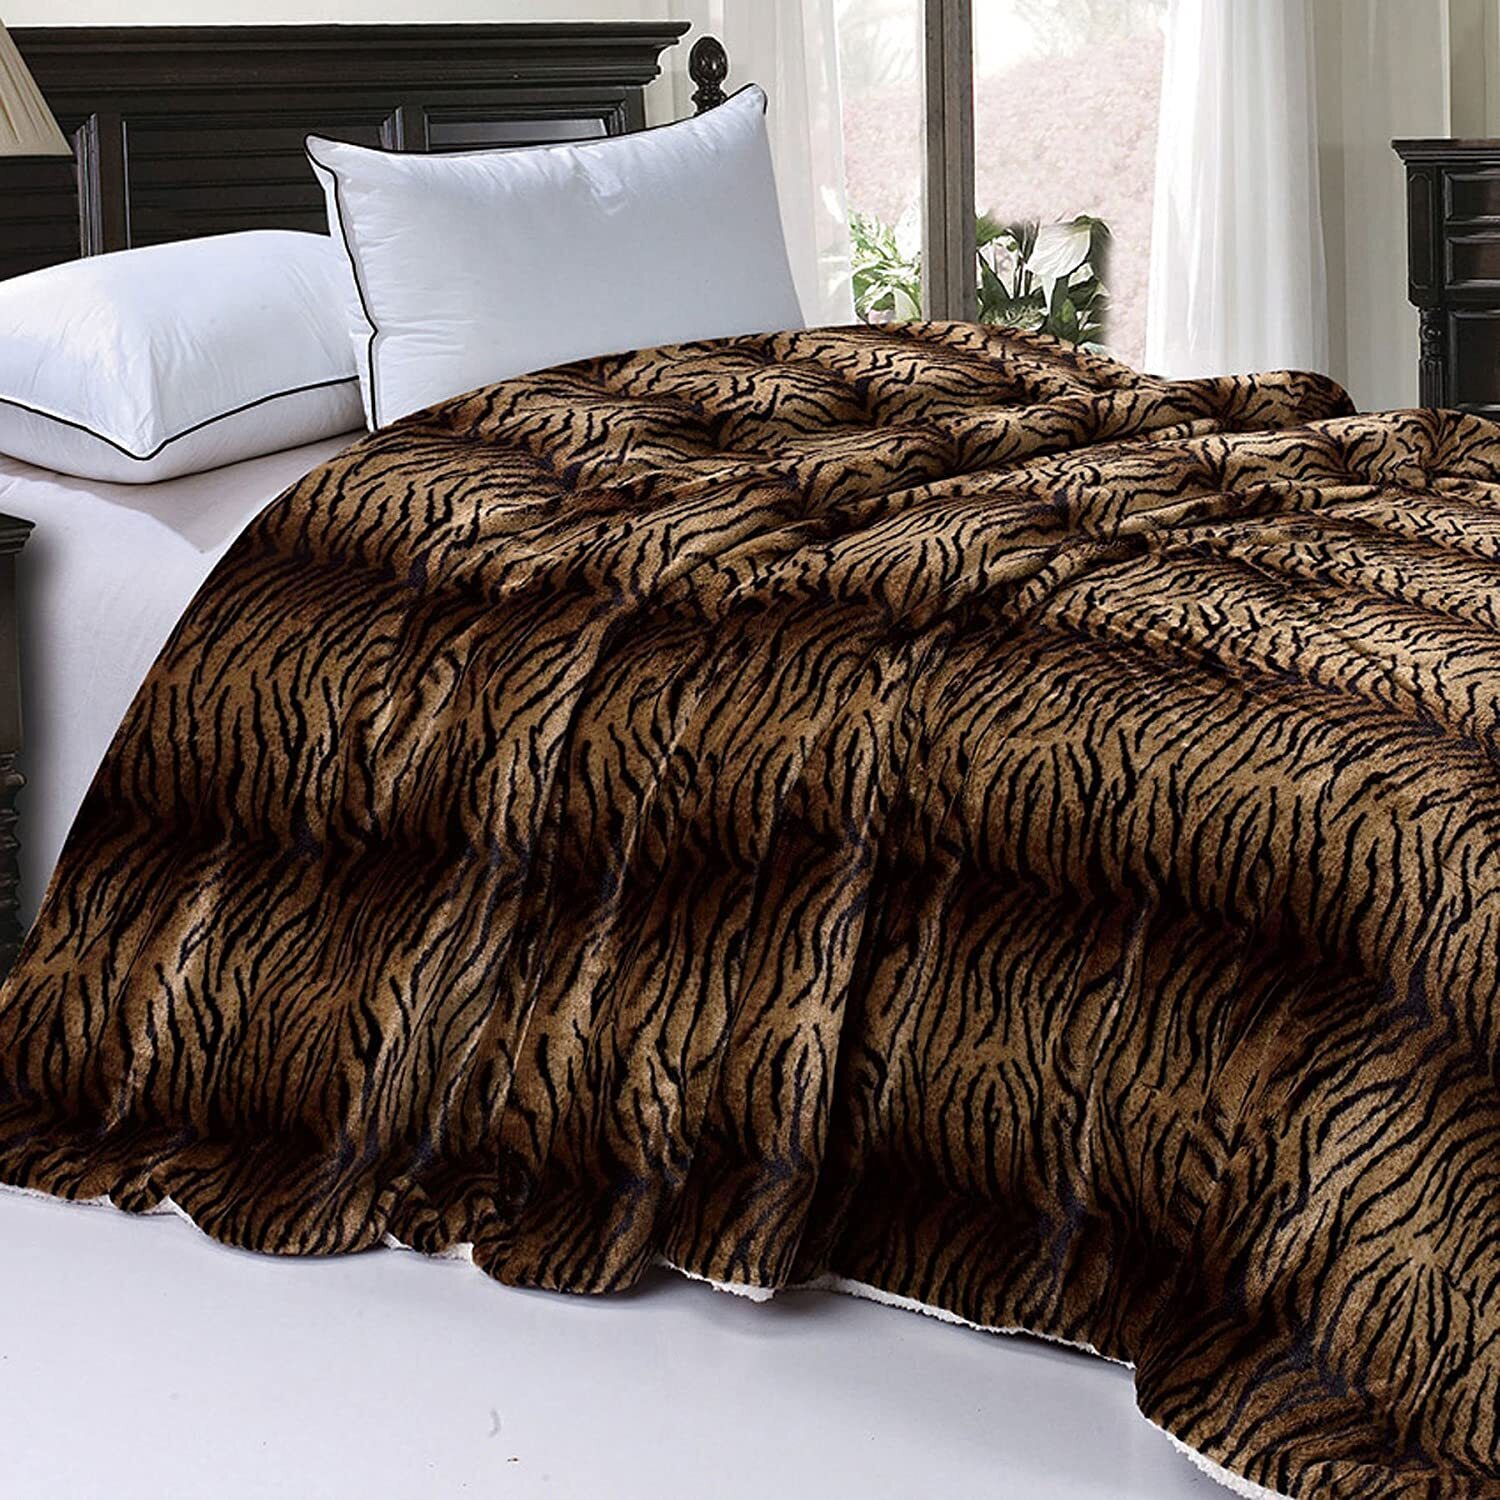 Tiger Print Bedding for Queen Bed